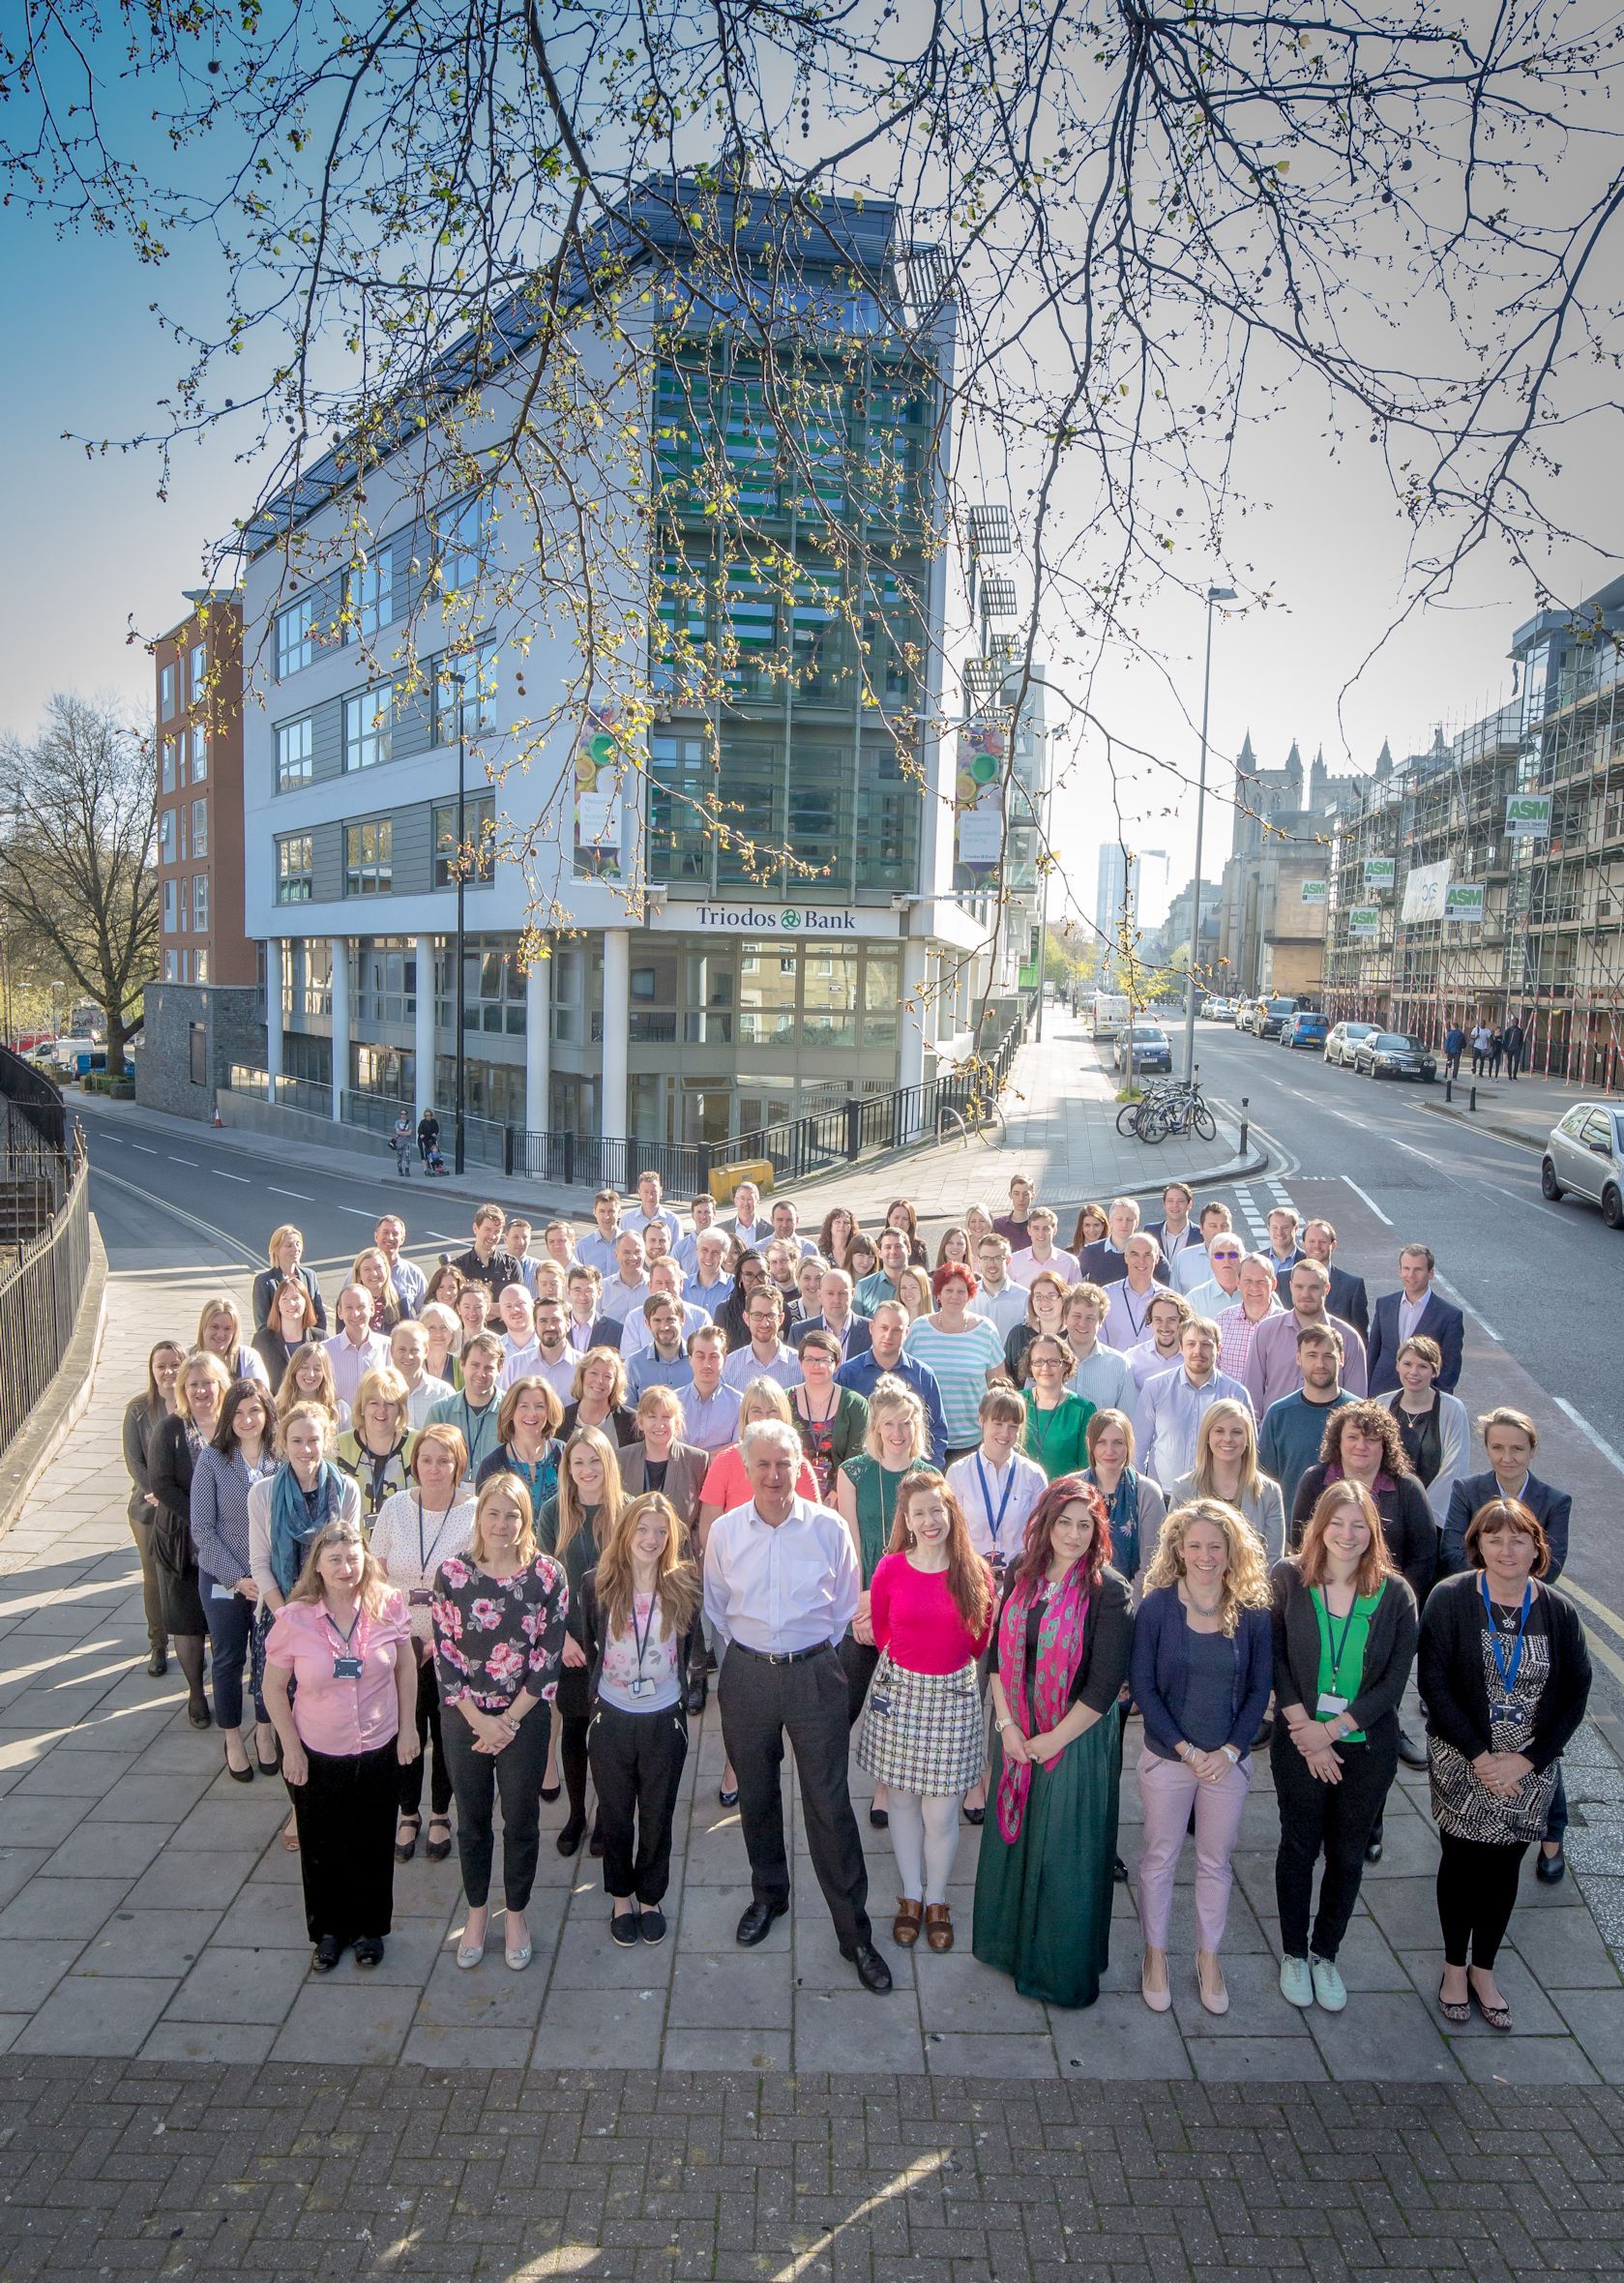 £11m Bristol head office acquisition by Triodos Bank